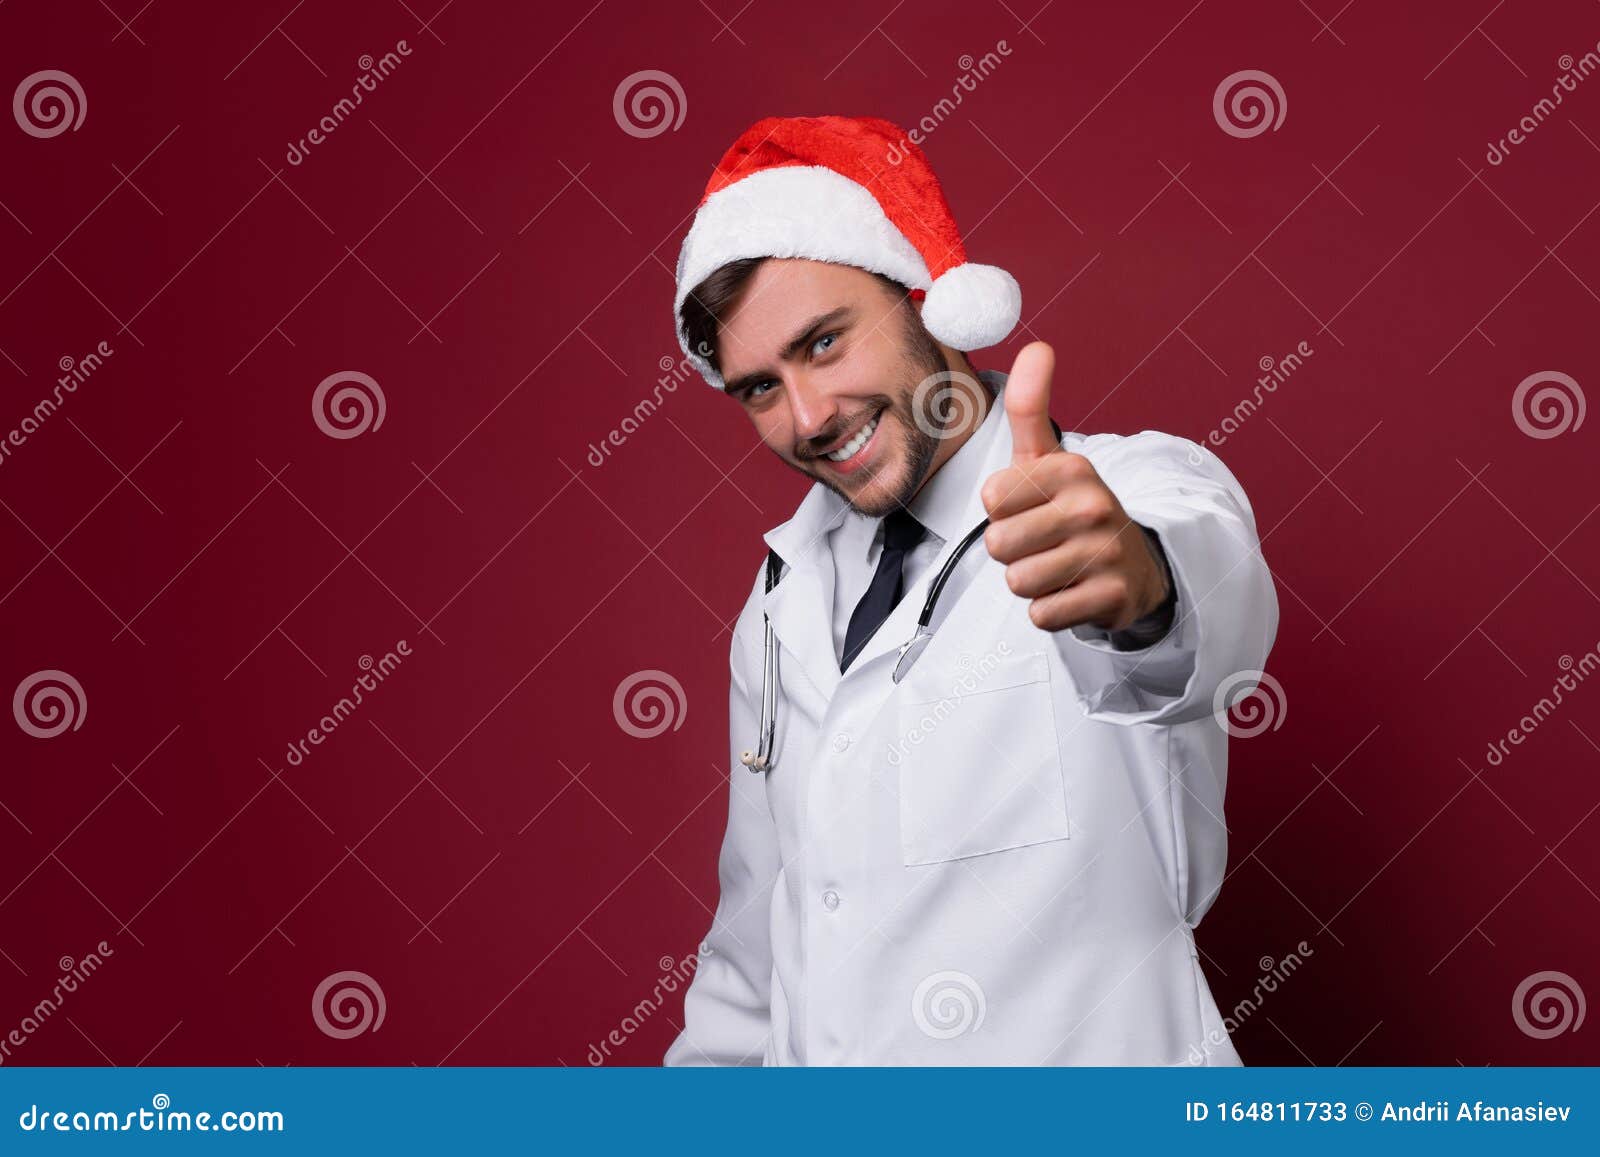 young handsome doctor in white uniforme and santa claus hat standing in studio on red background smile and showing a thumbs up